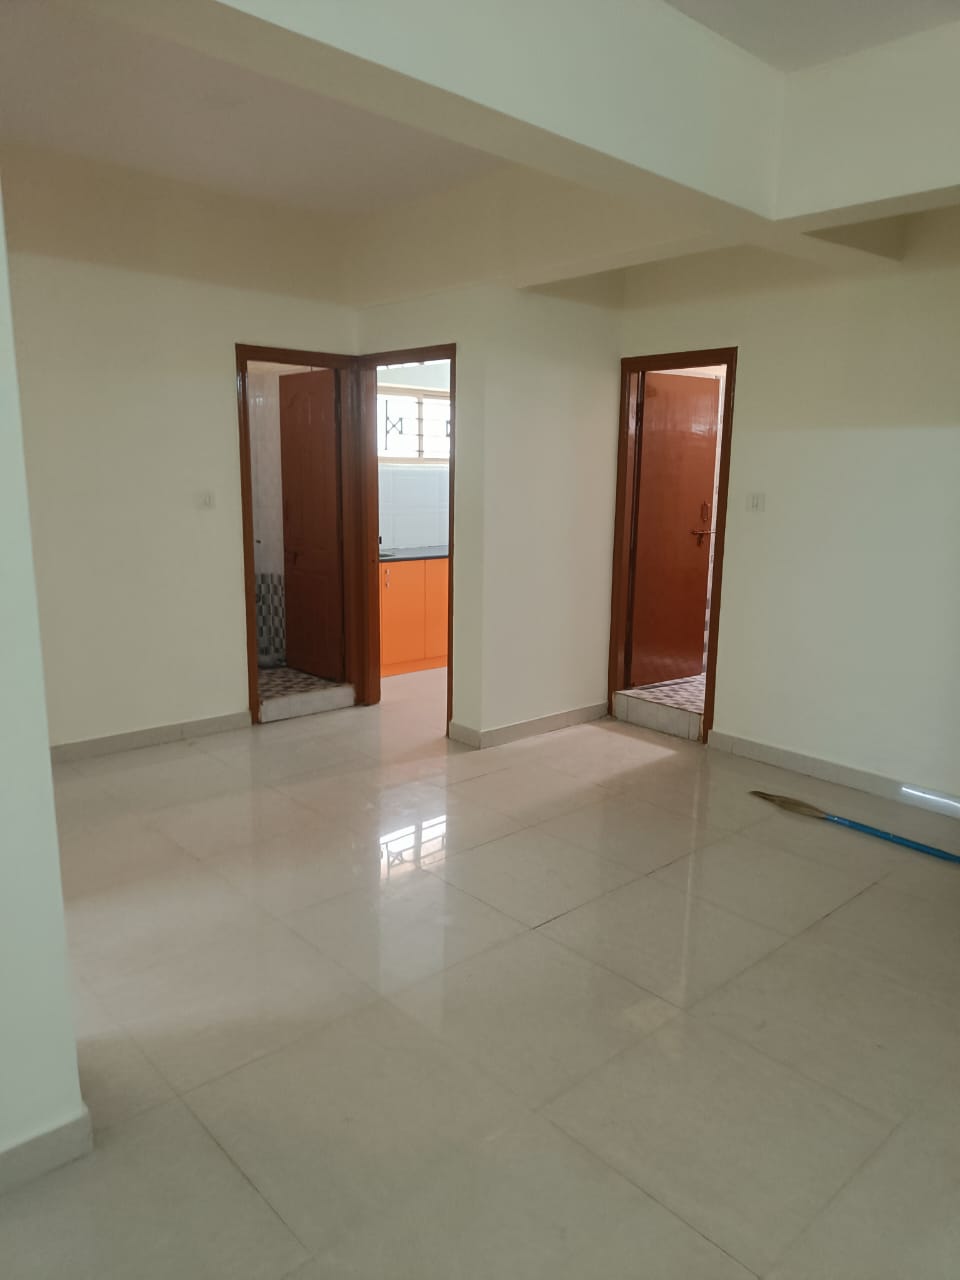 2 BHK Independent House for Lease Only at JAML2 - 2405 in Indira Nagar